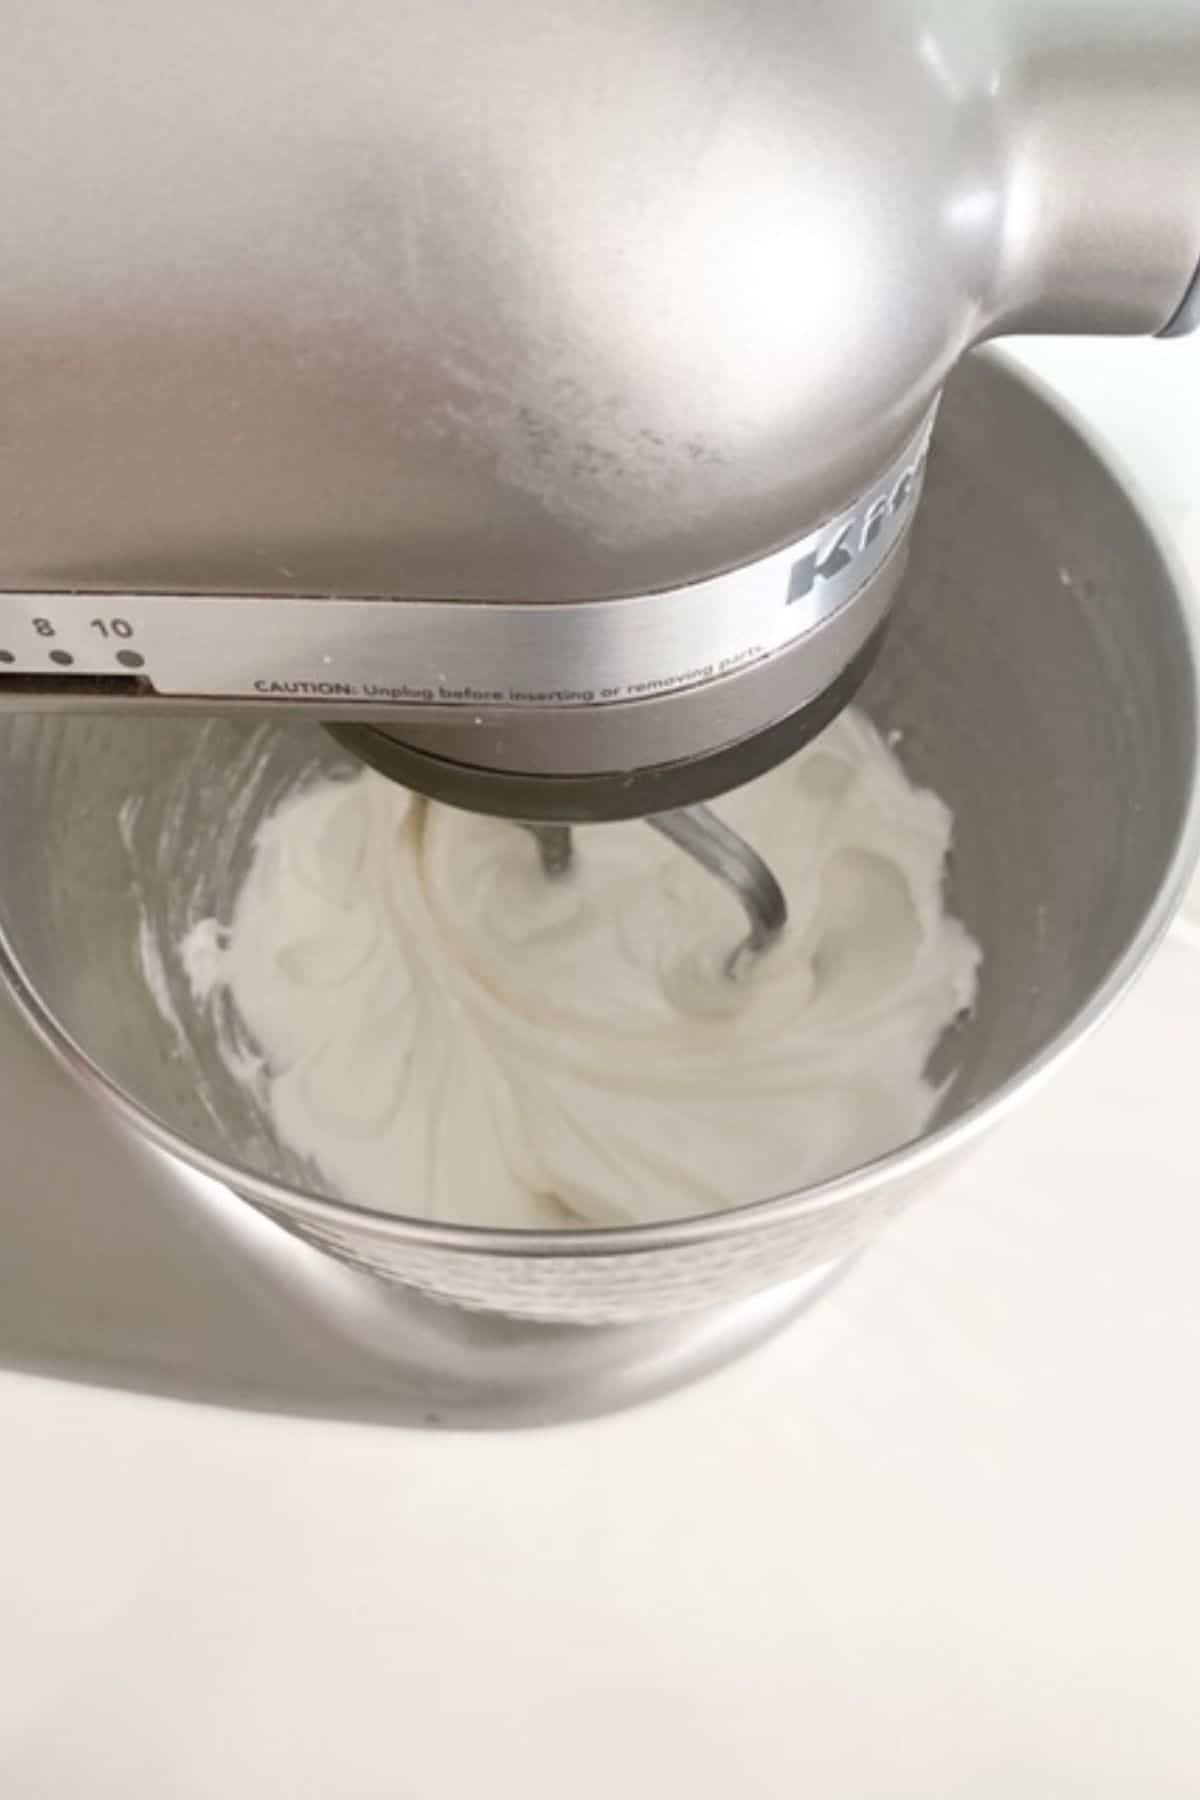 cake batter in a mixer